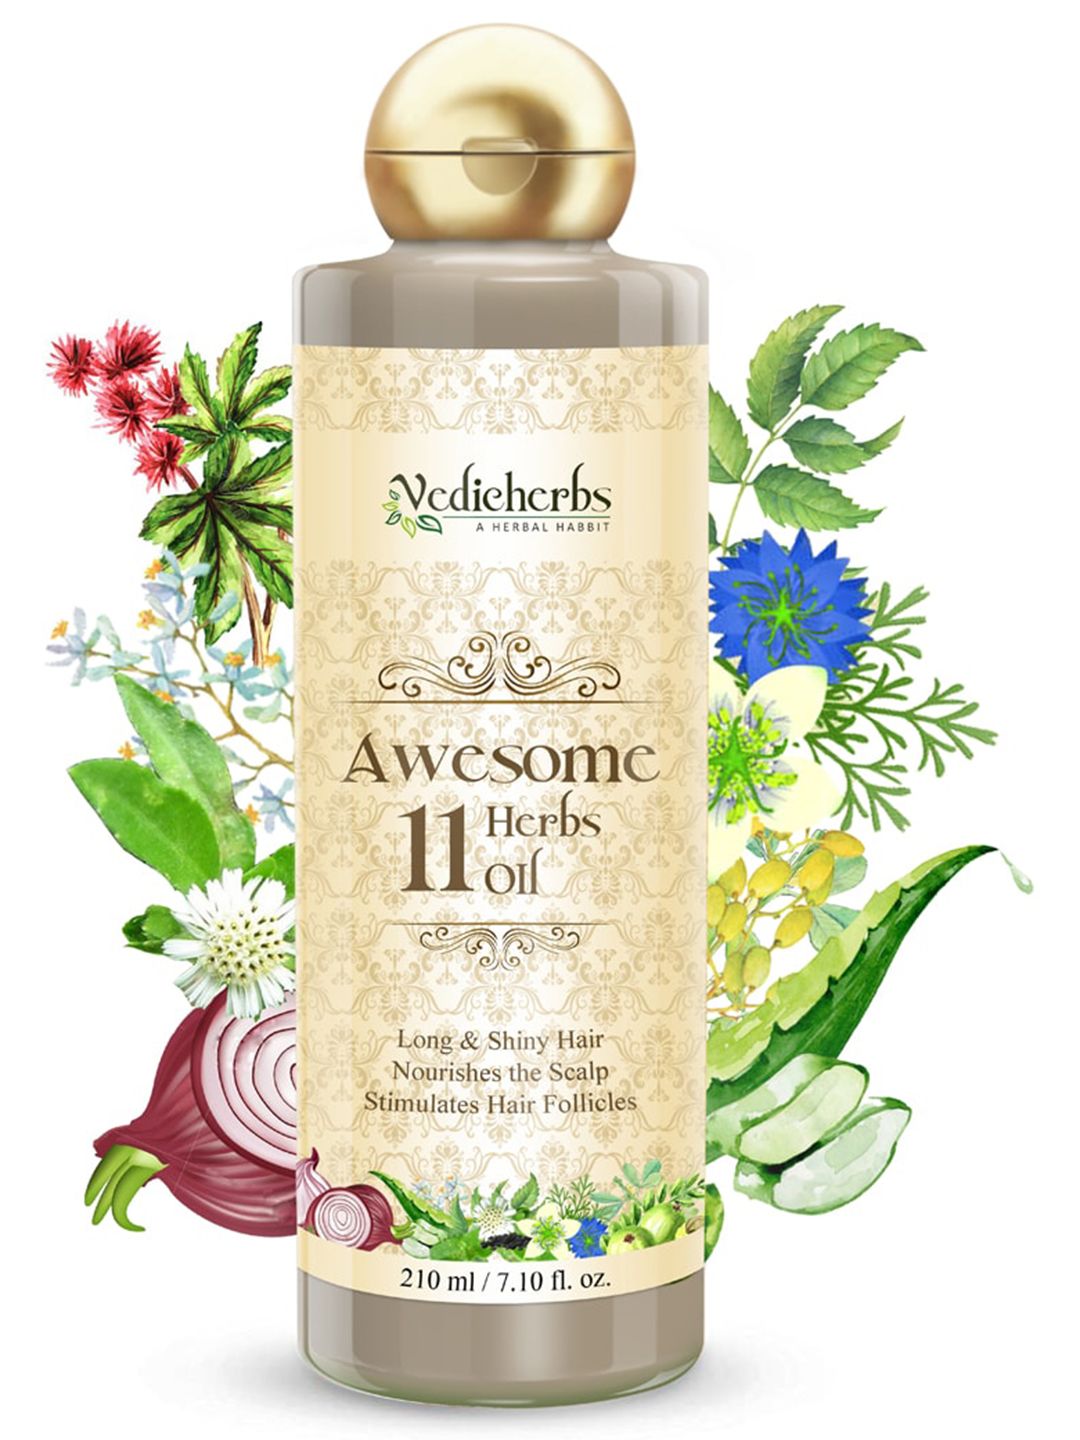 Vedicherbs Awesome 11 Herbs Oil for Long & Shiny Hair & Nourishes Scalp - 210 ml Price in India